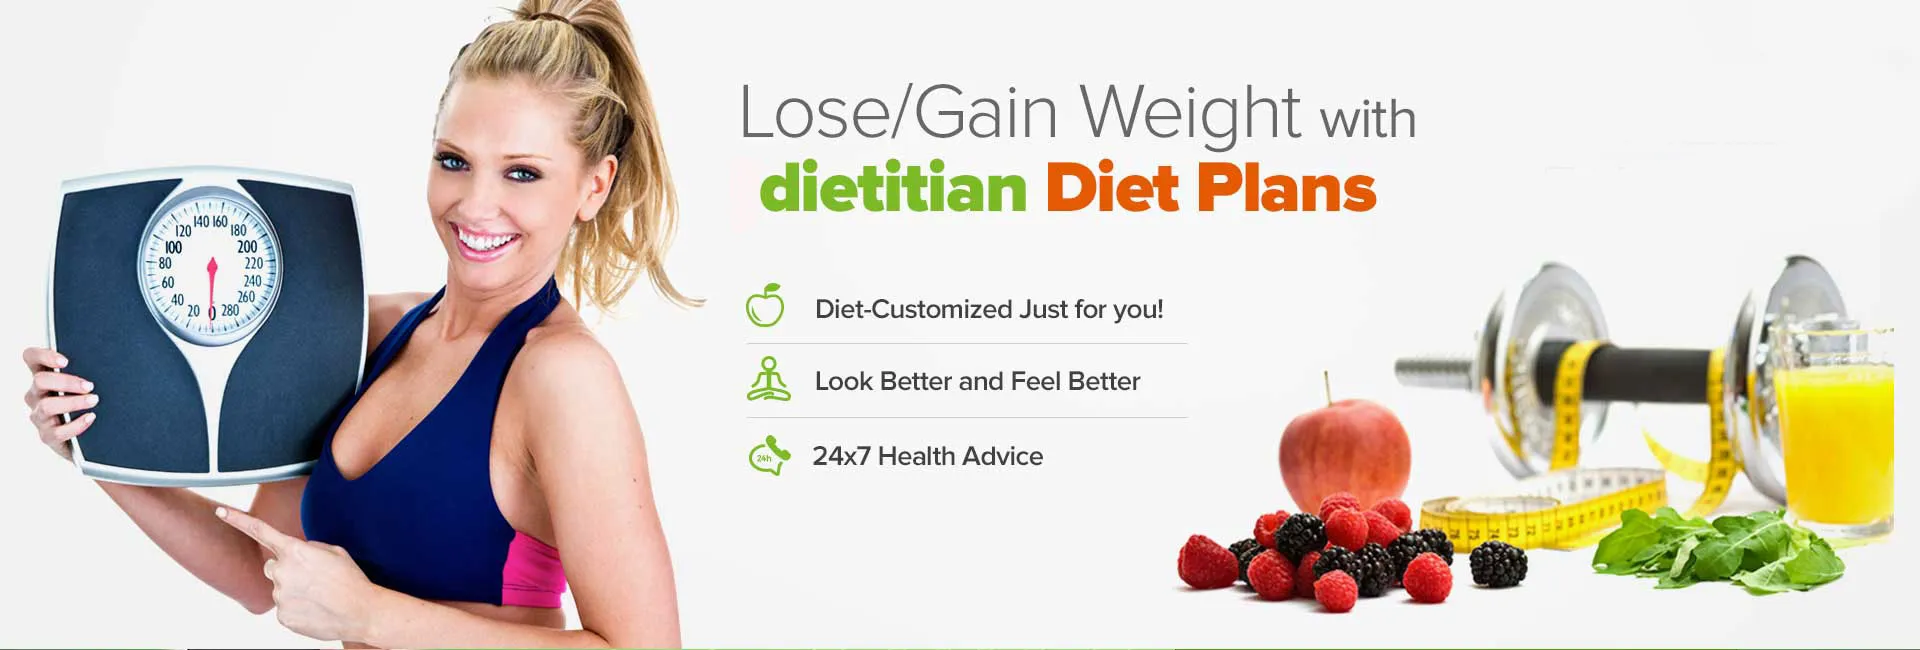 Diet Plan For Weight Loss In Ghalilah